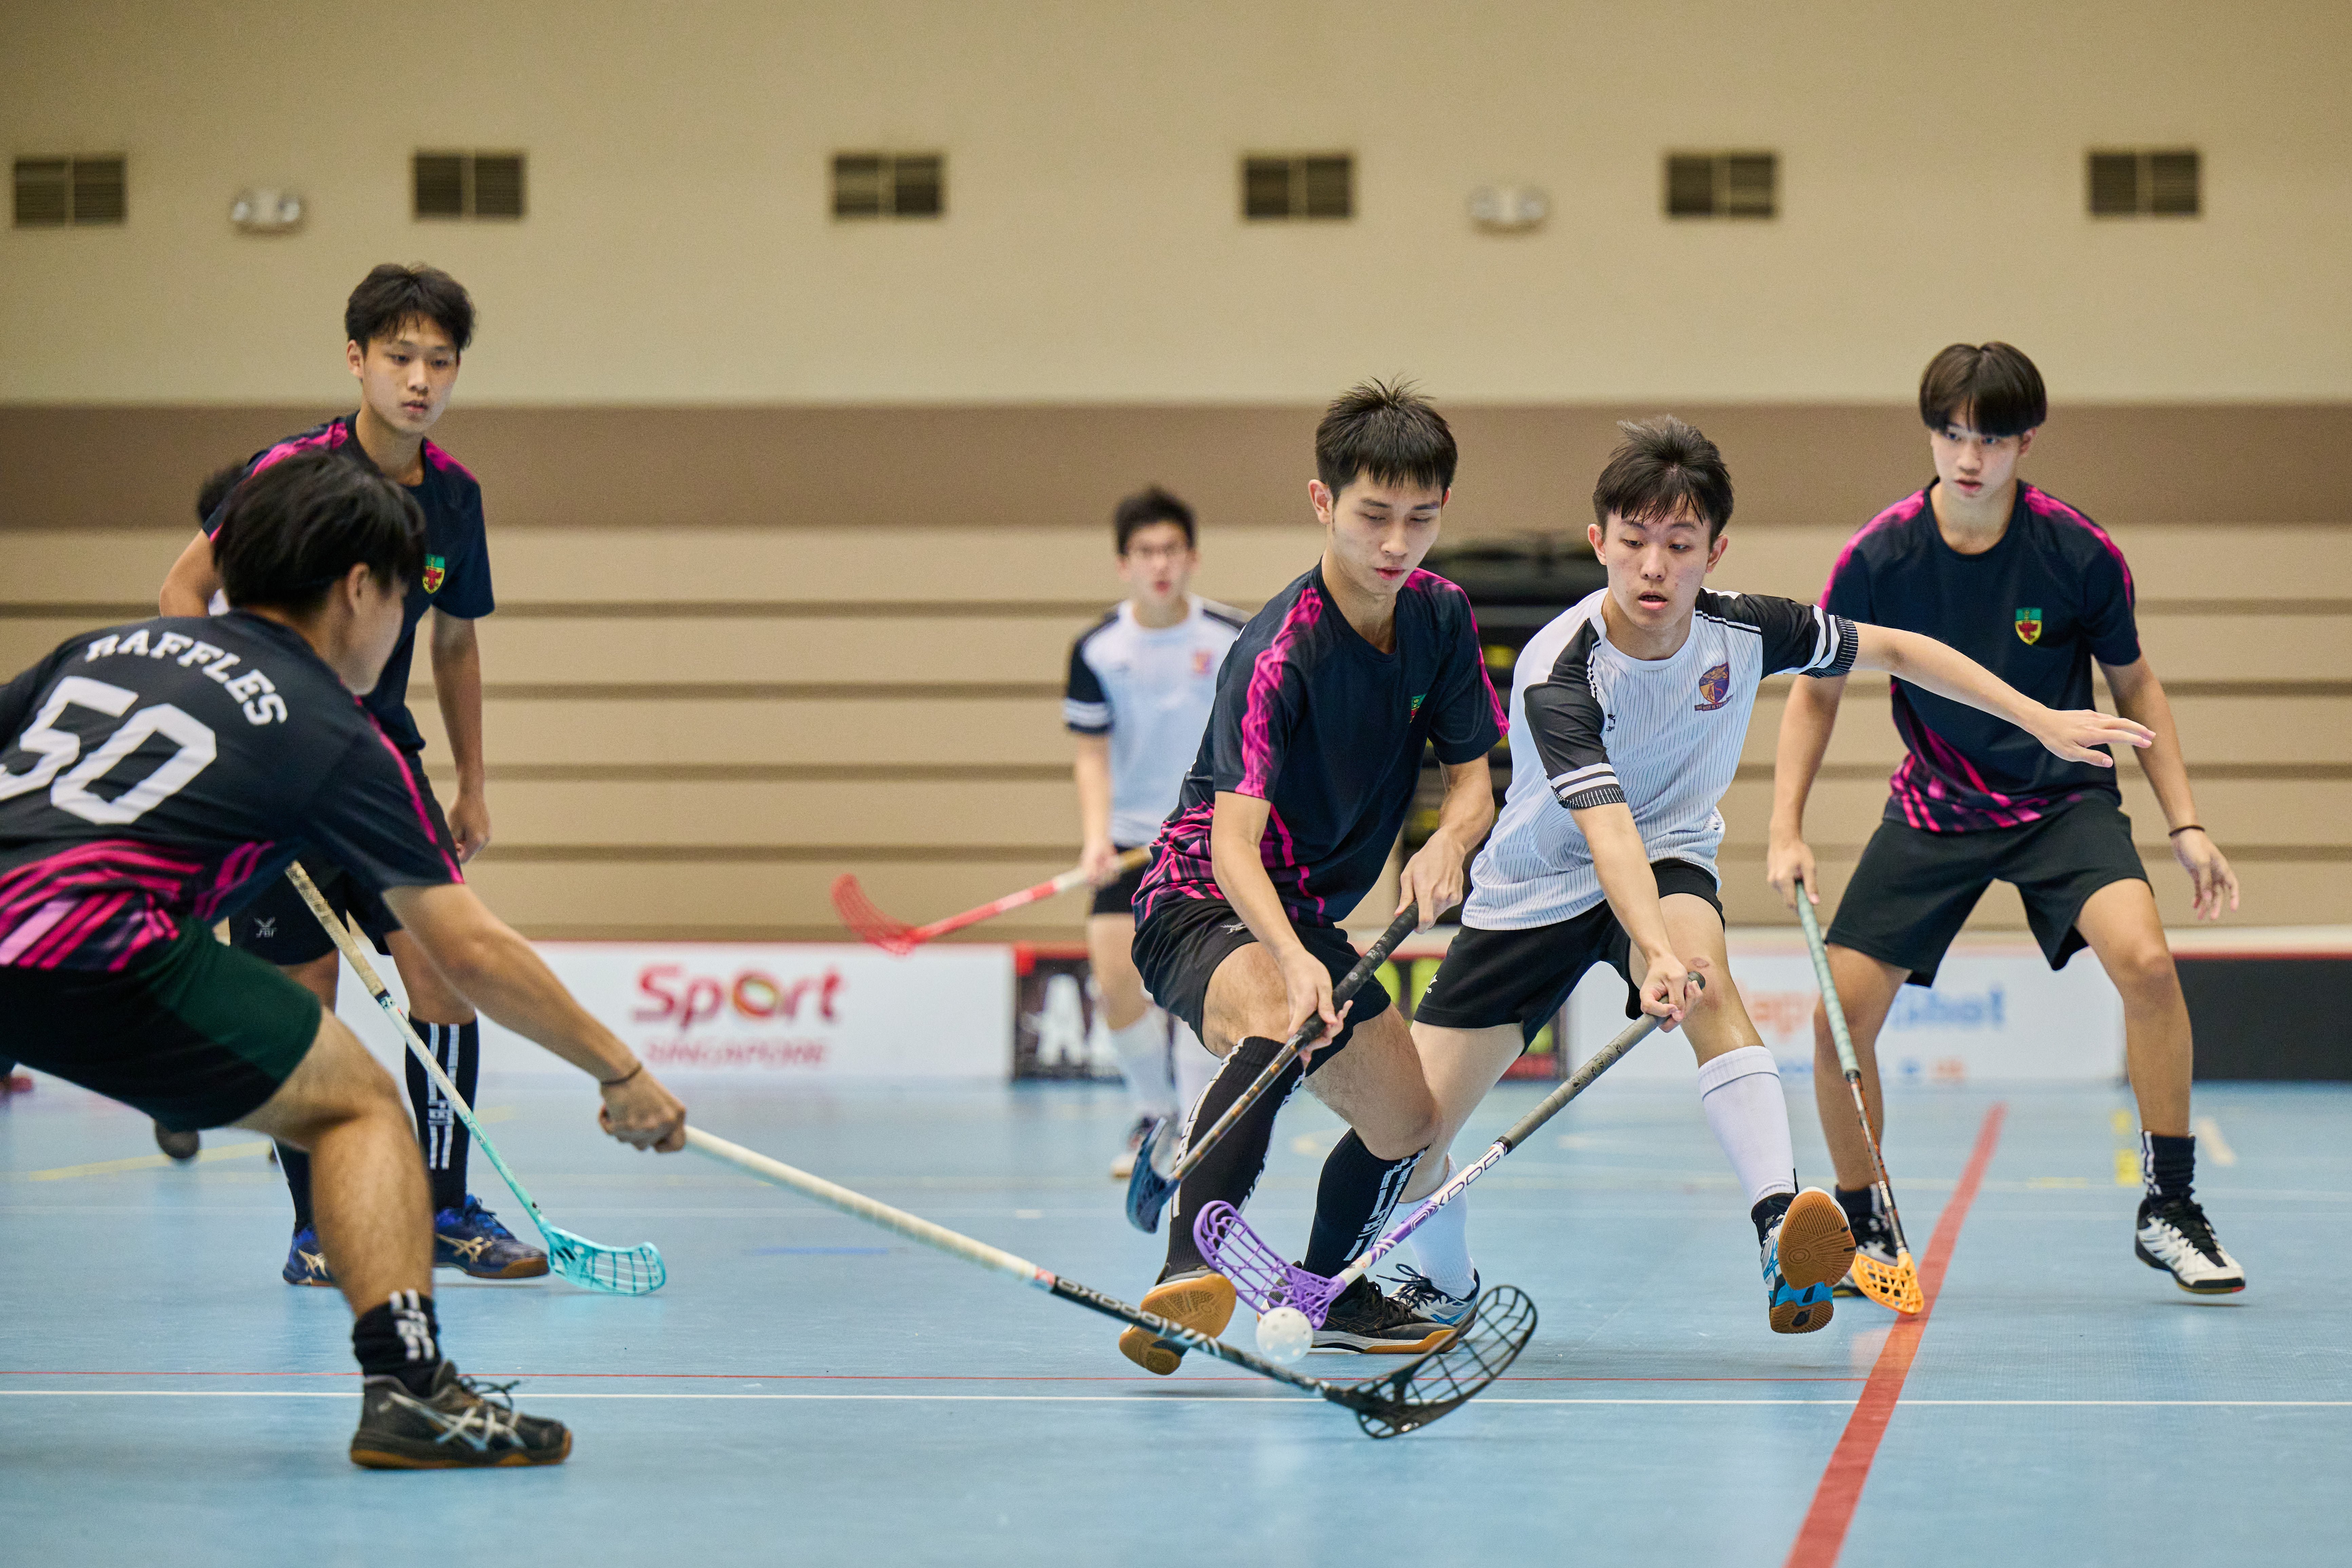 20220519_20220519 SSSC Floorball National A Div Boys Semi Finals Raffles Junior College Vs Anglo-Chinese Junior College_Siaw Woon Chong_0014